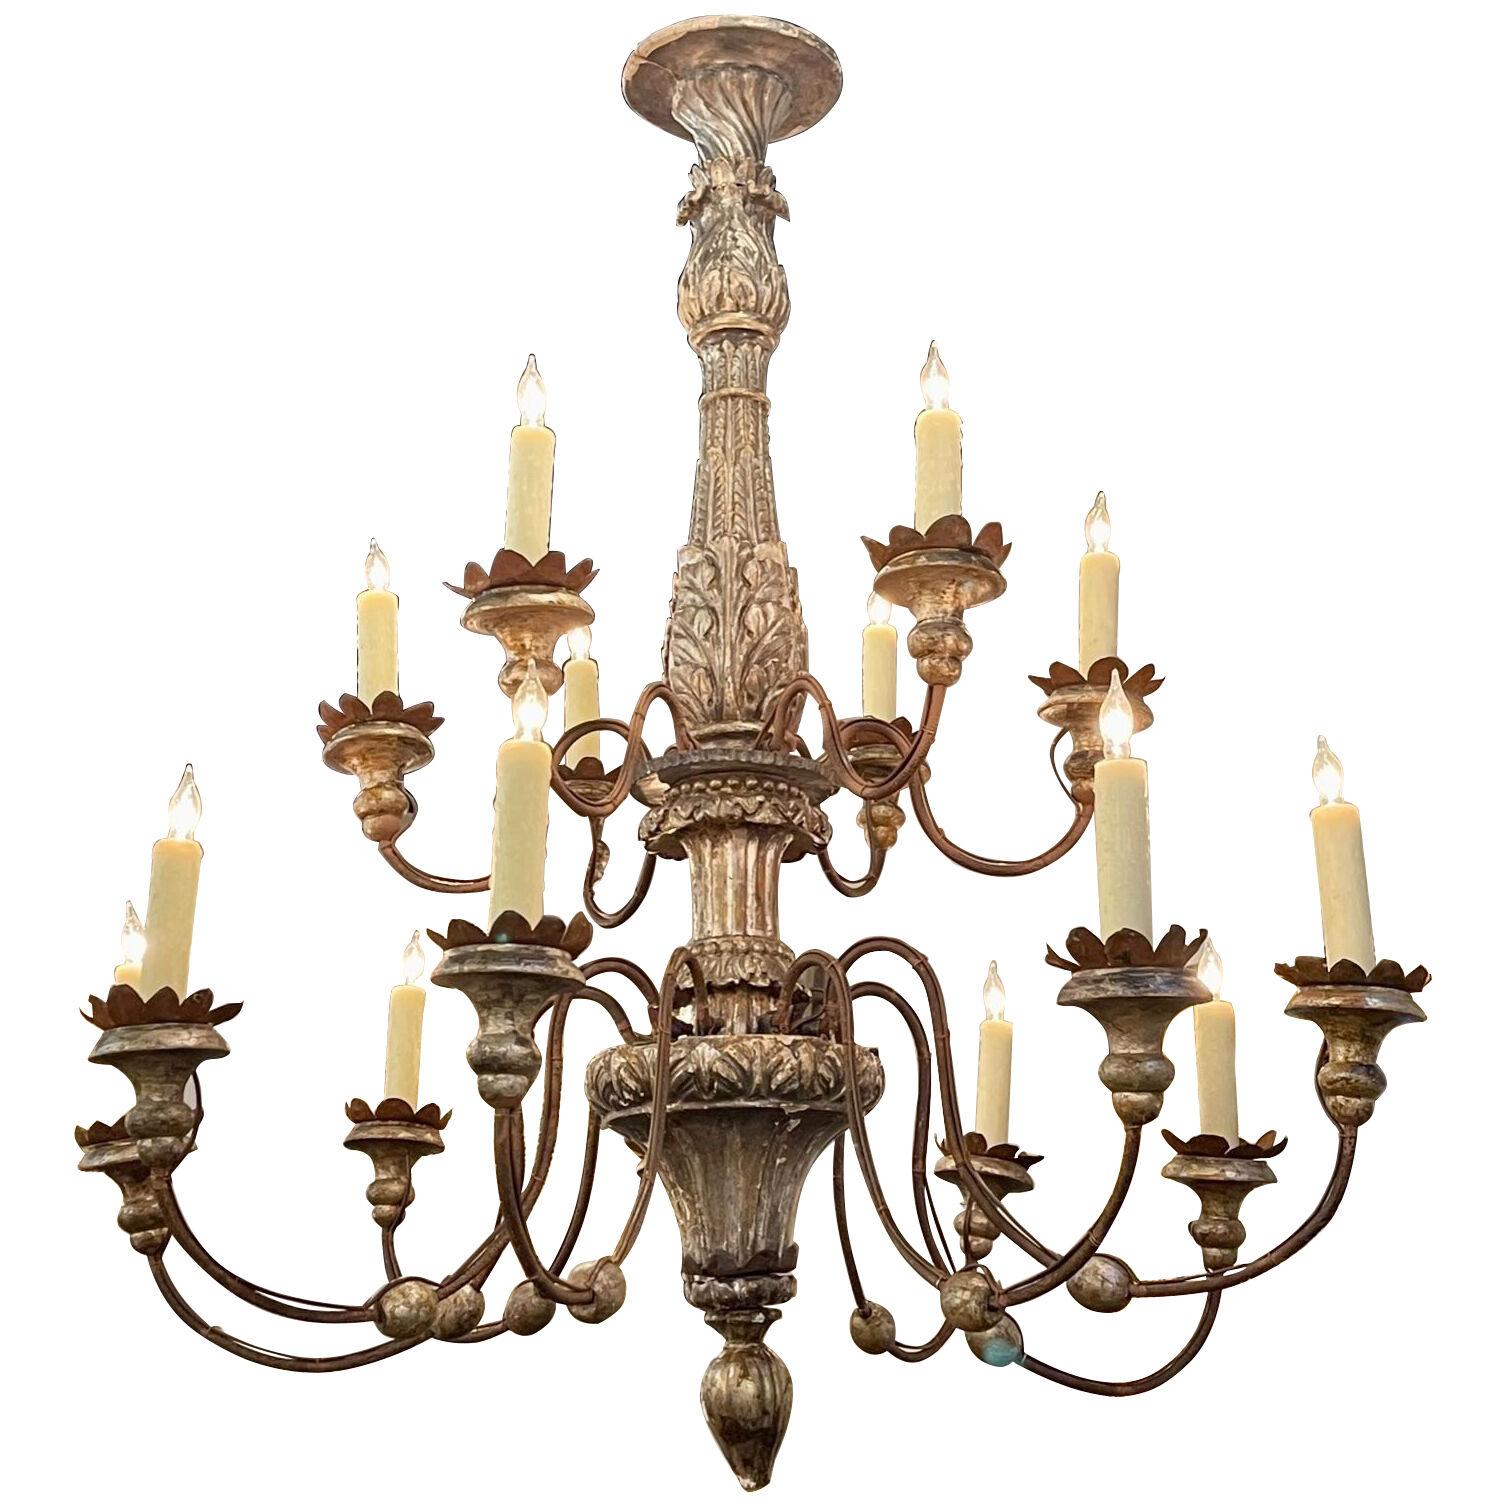 19th Century Italian Silver Giltwood Chandelier with Iron Arms